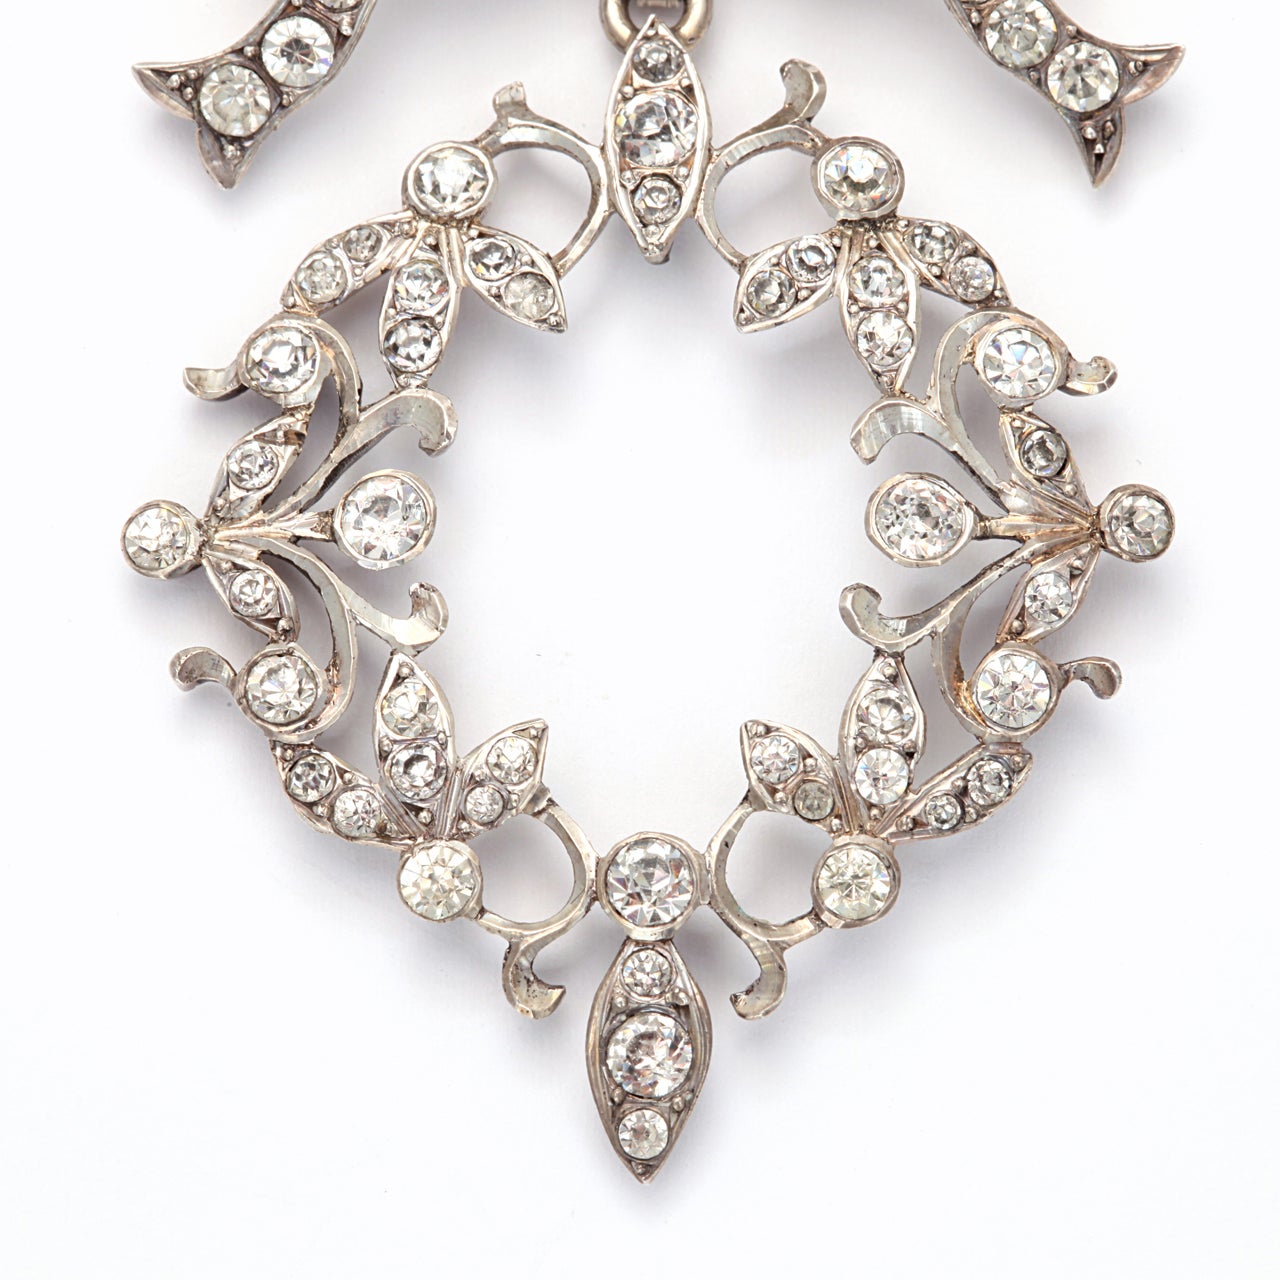 Graceful and unusual, with a bow as a reminder of affection, this silver and paste pendant was made in France in the Art Nouveau period when curves and swirls and garlands dressed architecture and ladies. The paste stones are a variety of sizes, a